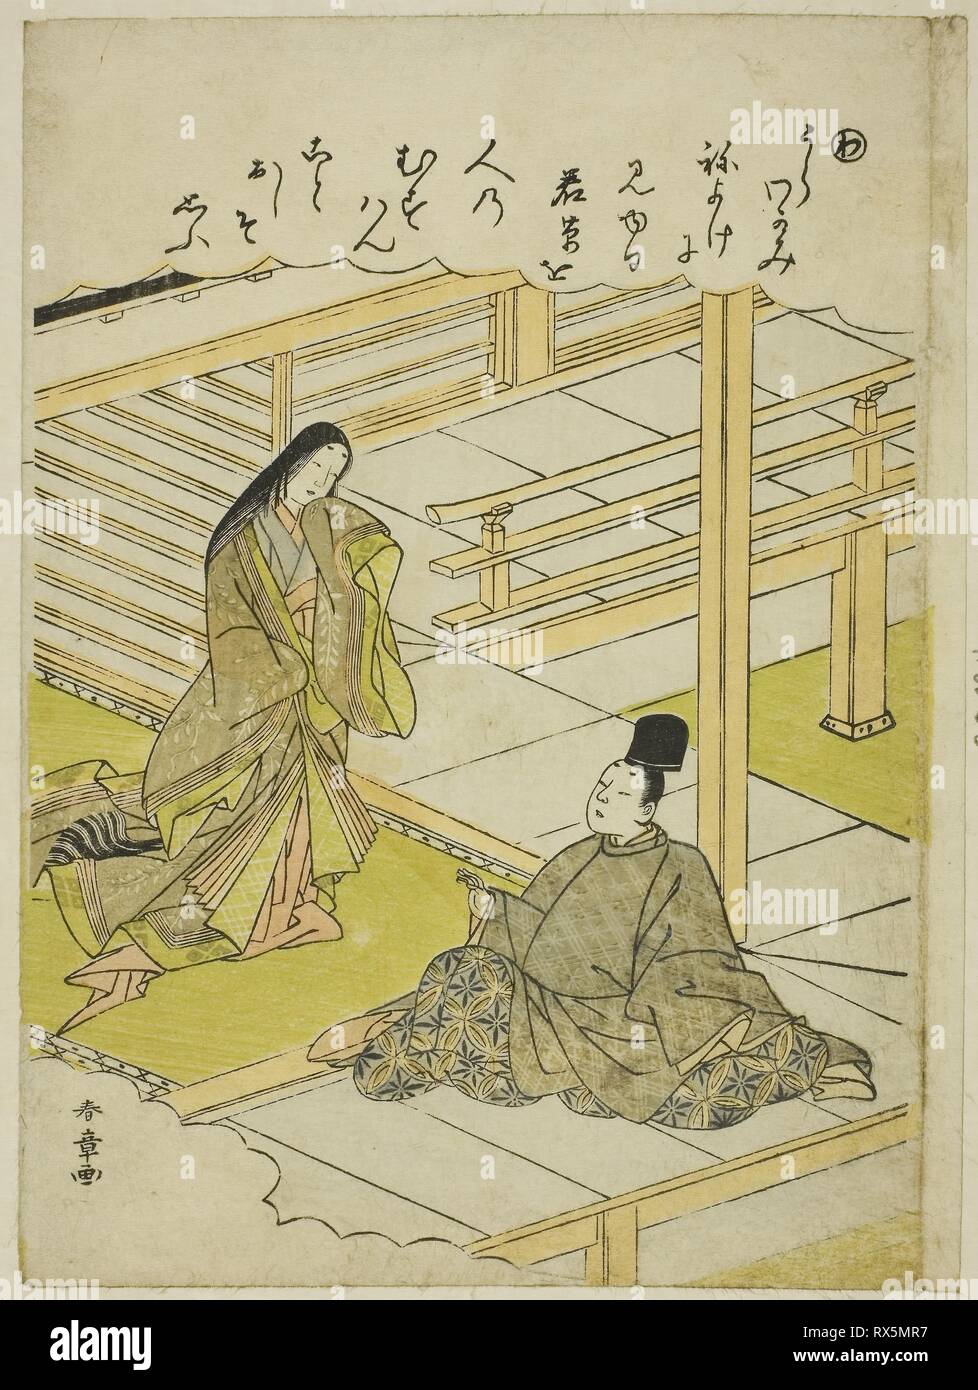 'Wa': Young Grass, from the series 'Tales of Ise in Fashionable Brocade Pictures (Furyu nishiki-e Ise monogatari)'. Katsukawa Shunsho ?? ??; Japanese, 1726-1792. Date: 1767-1778. Dimensions: 9 x 6 1/4 in. Color woodblock print; koban. Origin: Japan. Museum: The Chicago Art Institute. Stock Photo